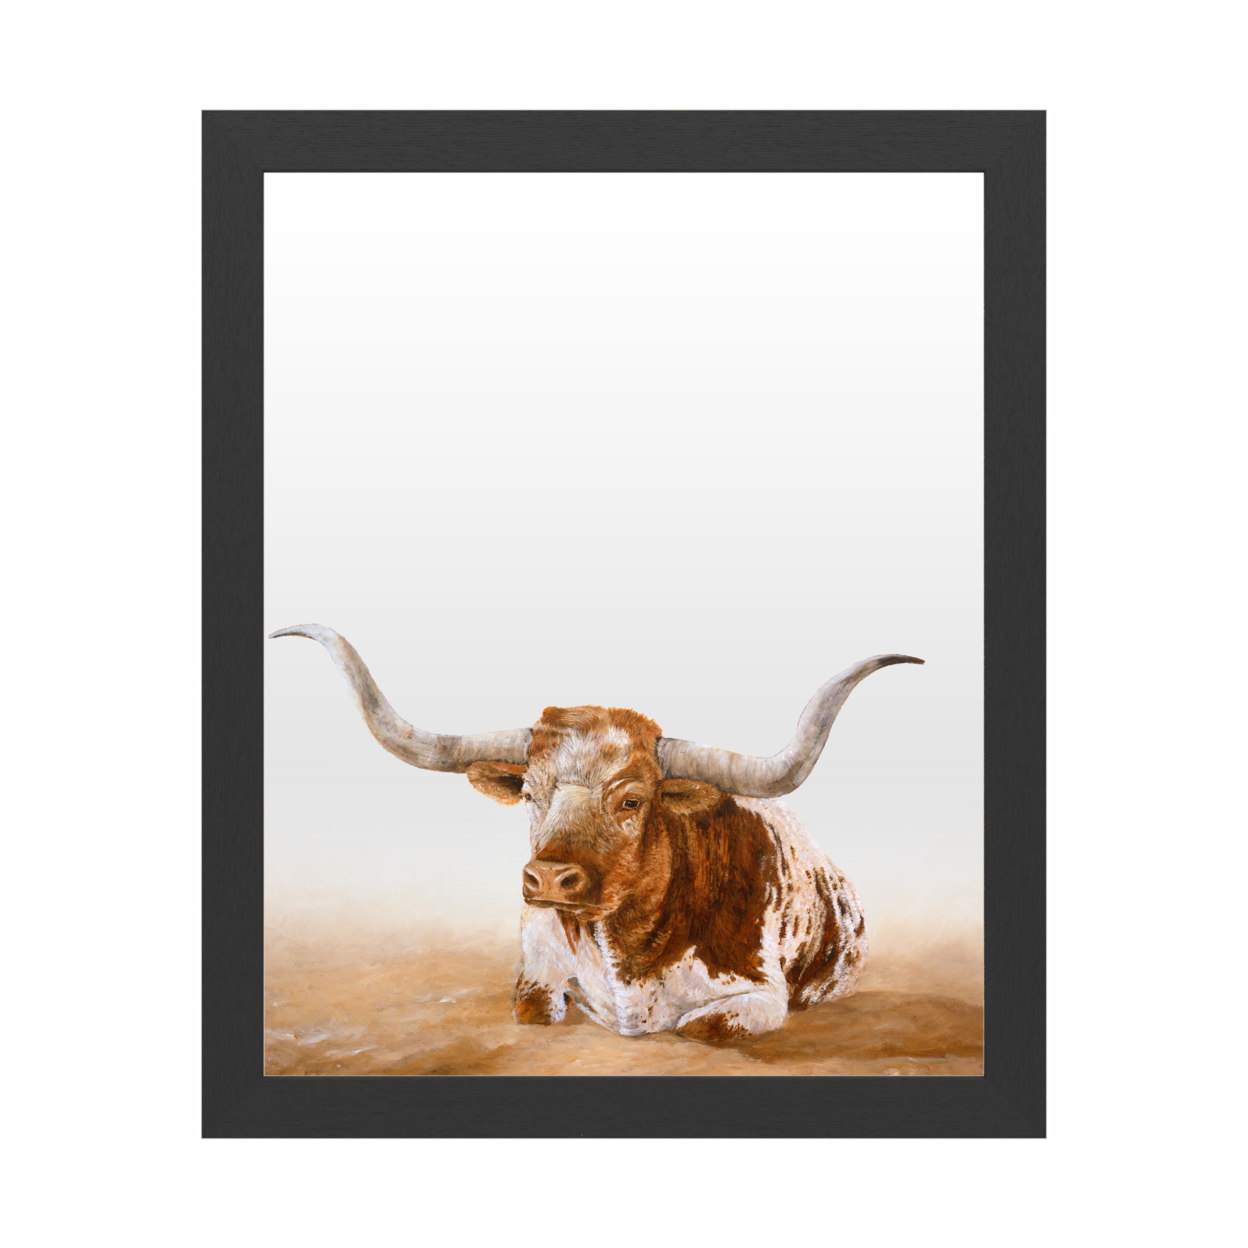 Dry Erase 16 X 20 Marker Board With Printed Artwork - Kathy Winkler Easy Rider Cows White Board - Ready To Hang